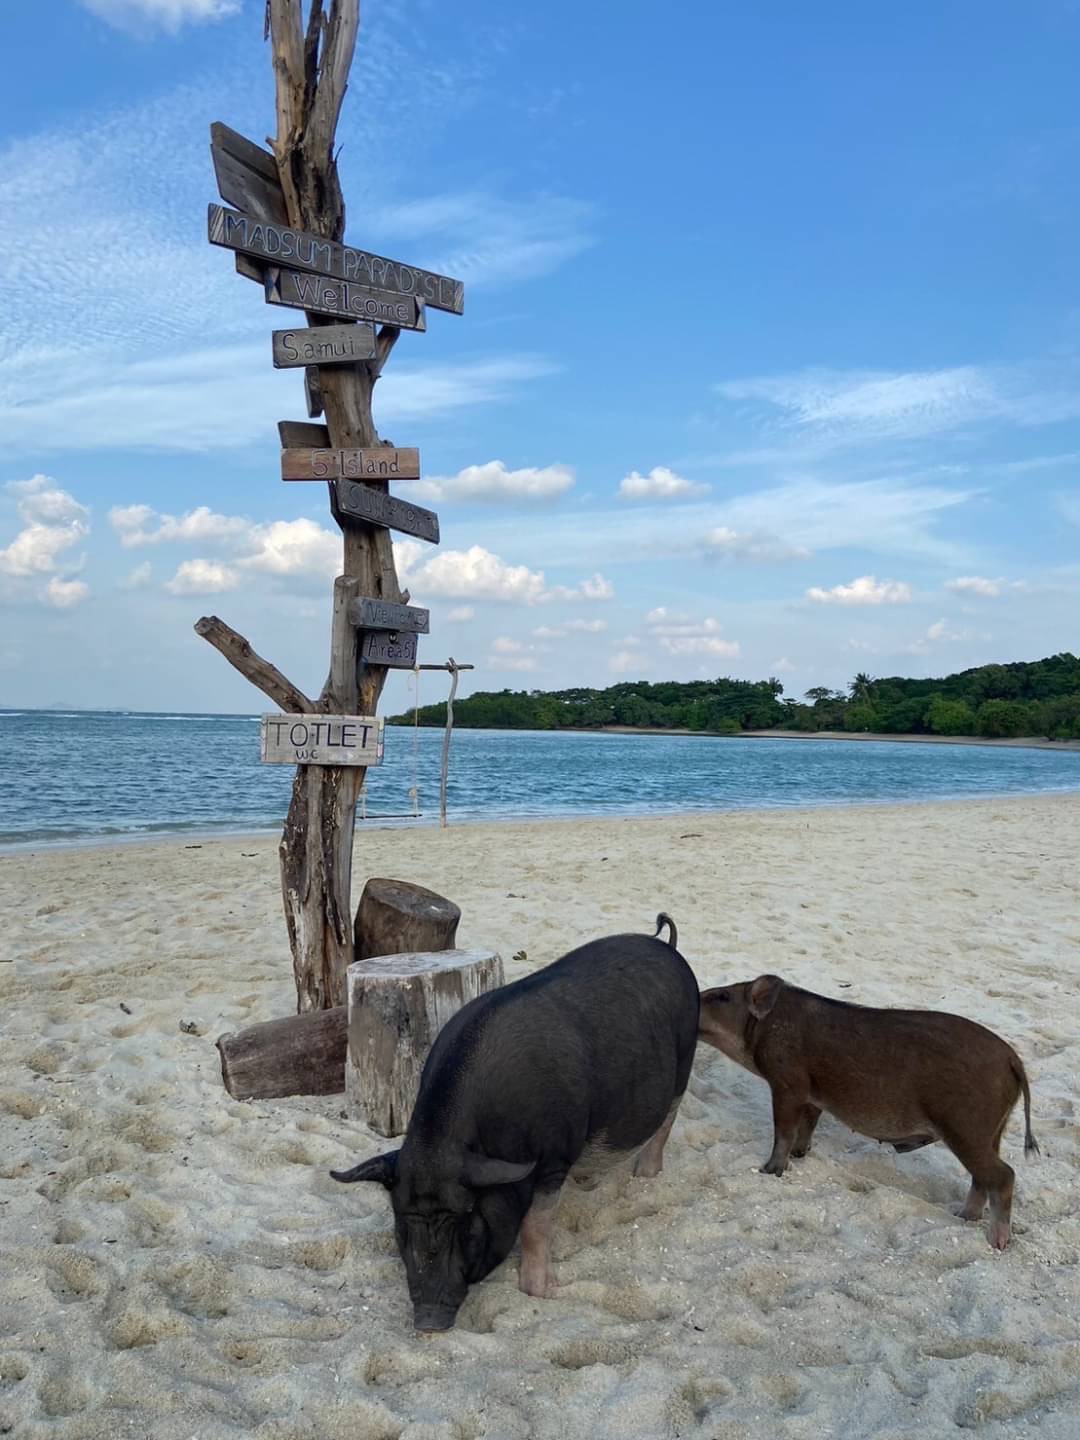 Two pigs on a sandy beach with a wooden direction signpost in the background.